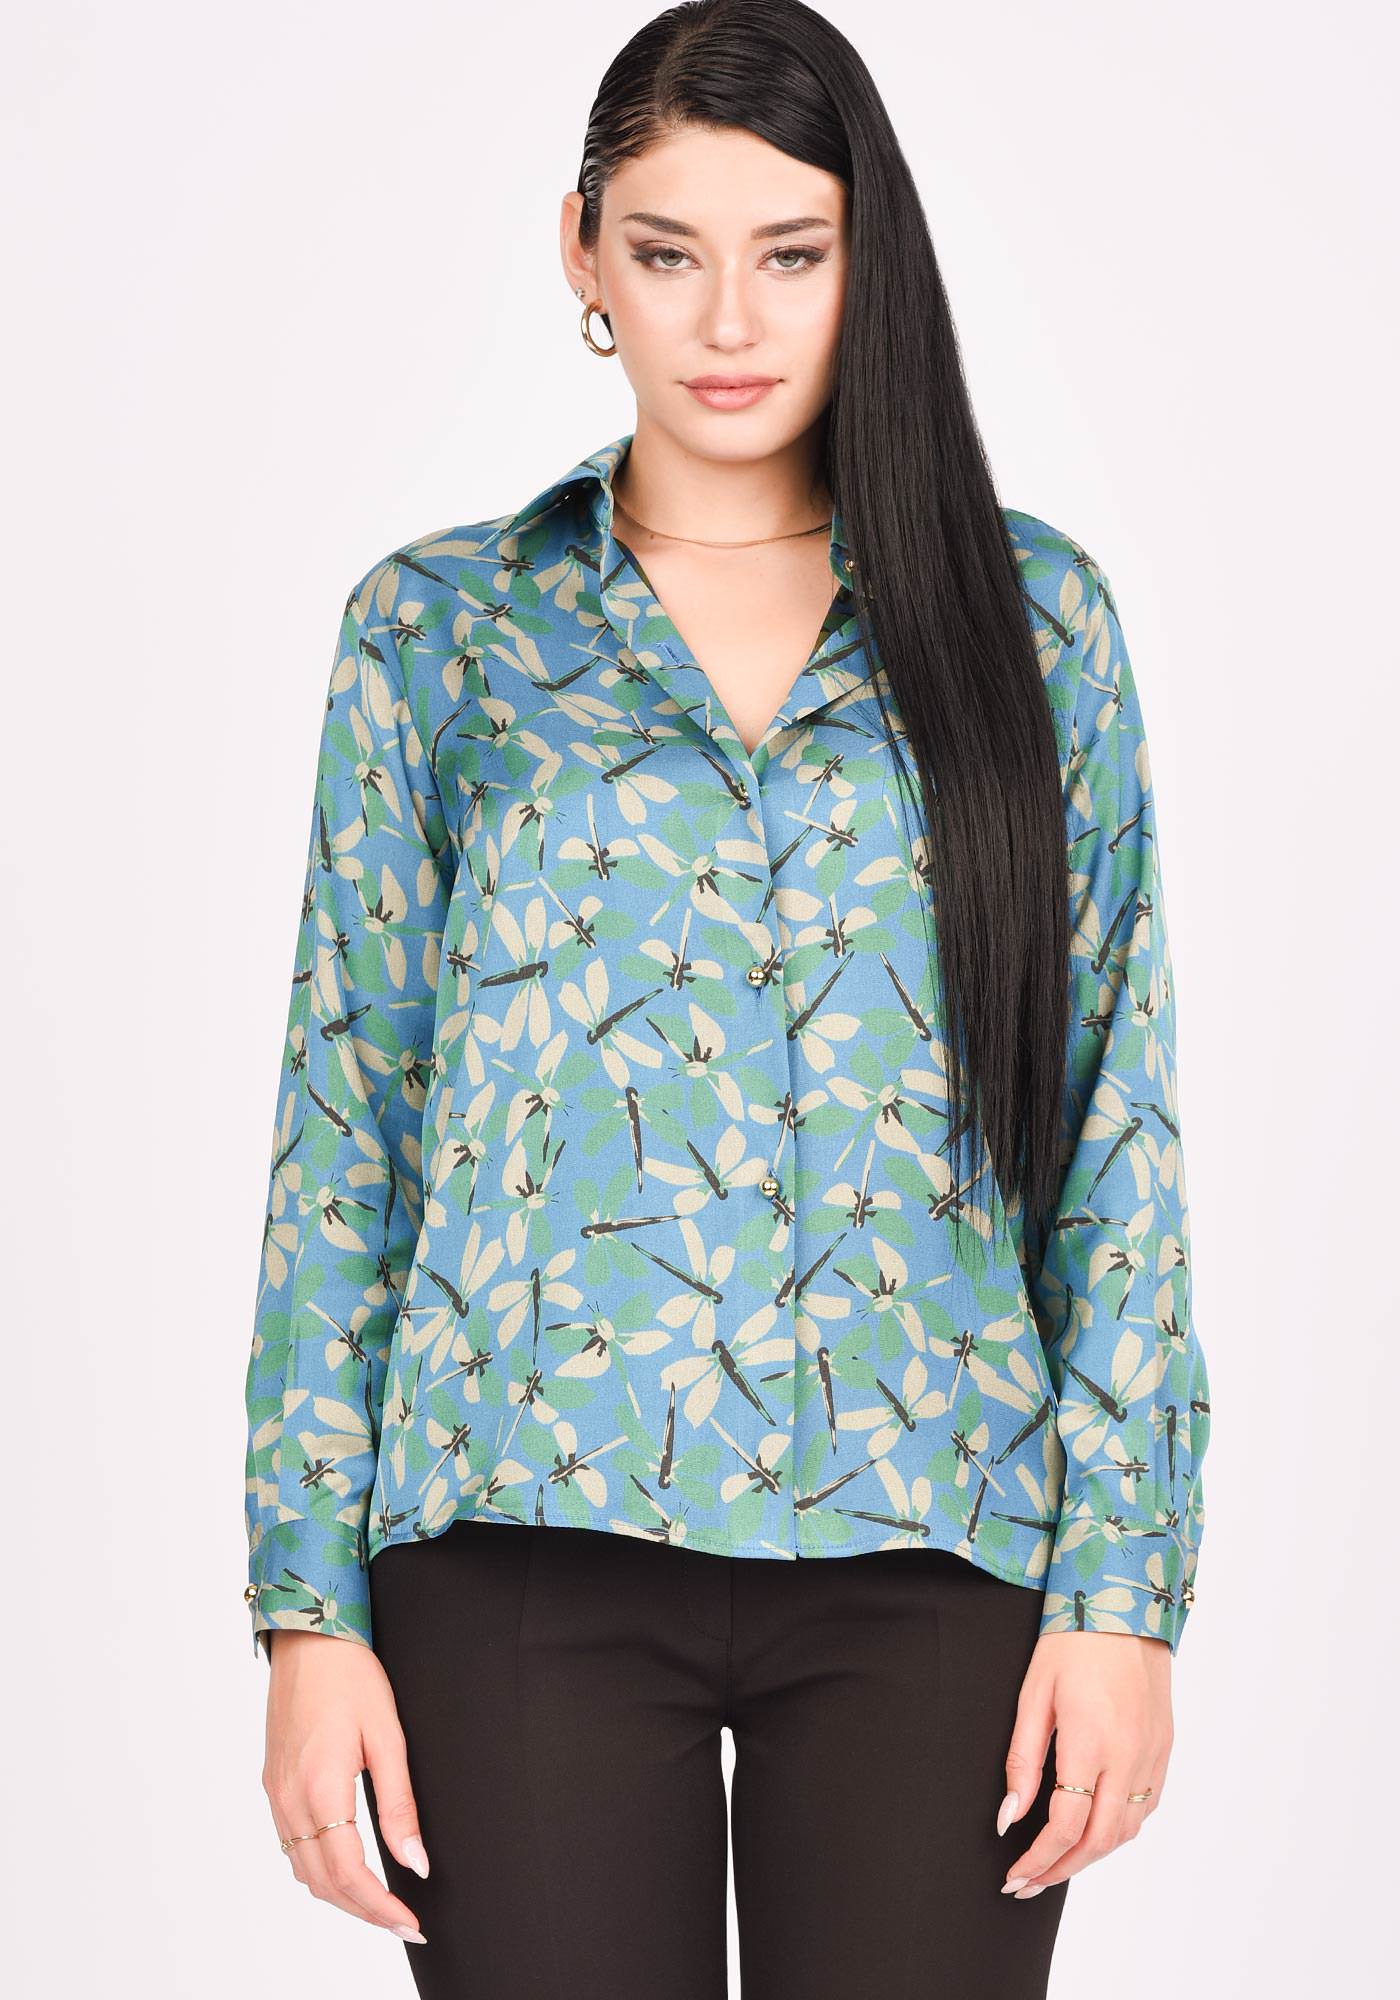 Women's Relaxed Button up Shirt in Dragonfly print Satin